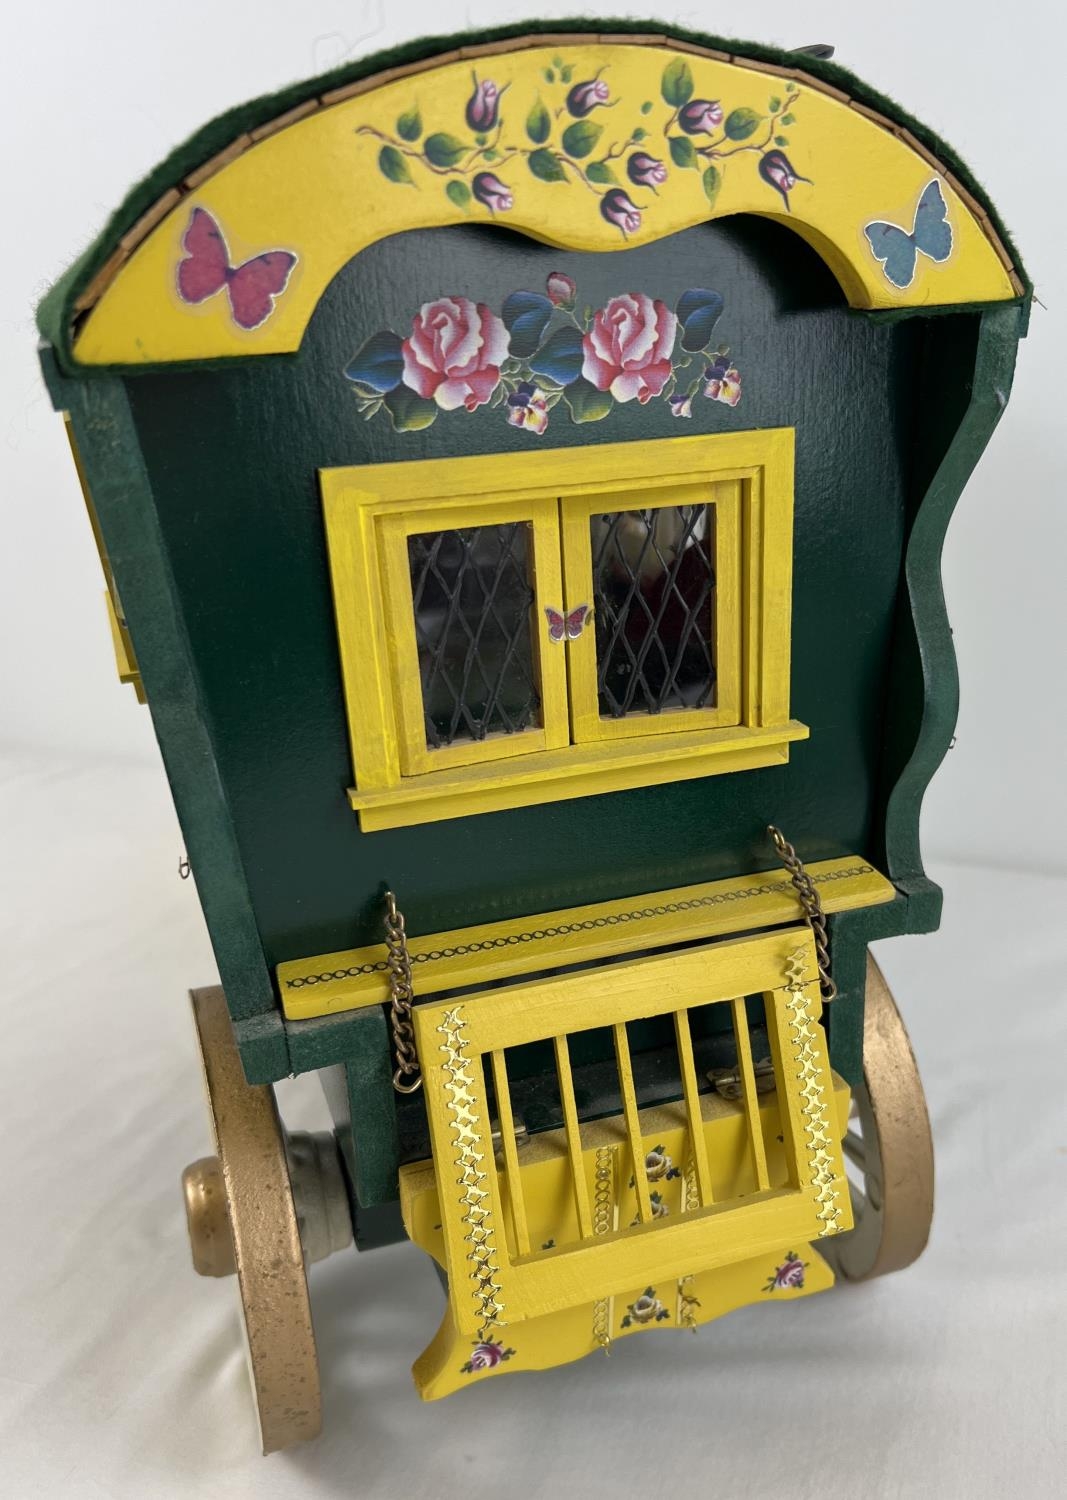 A painted wooden model of a Gypsy caravan with hand painted and sticker detail and green felt - Image 9 of 9